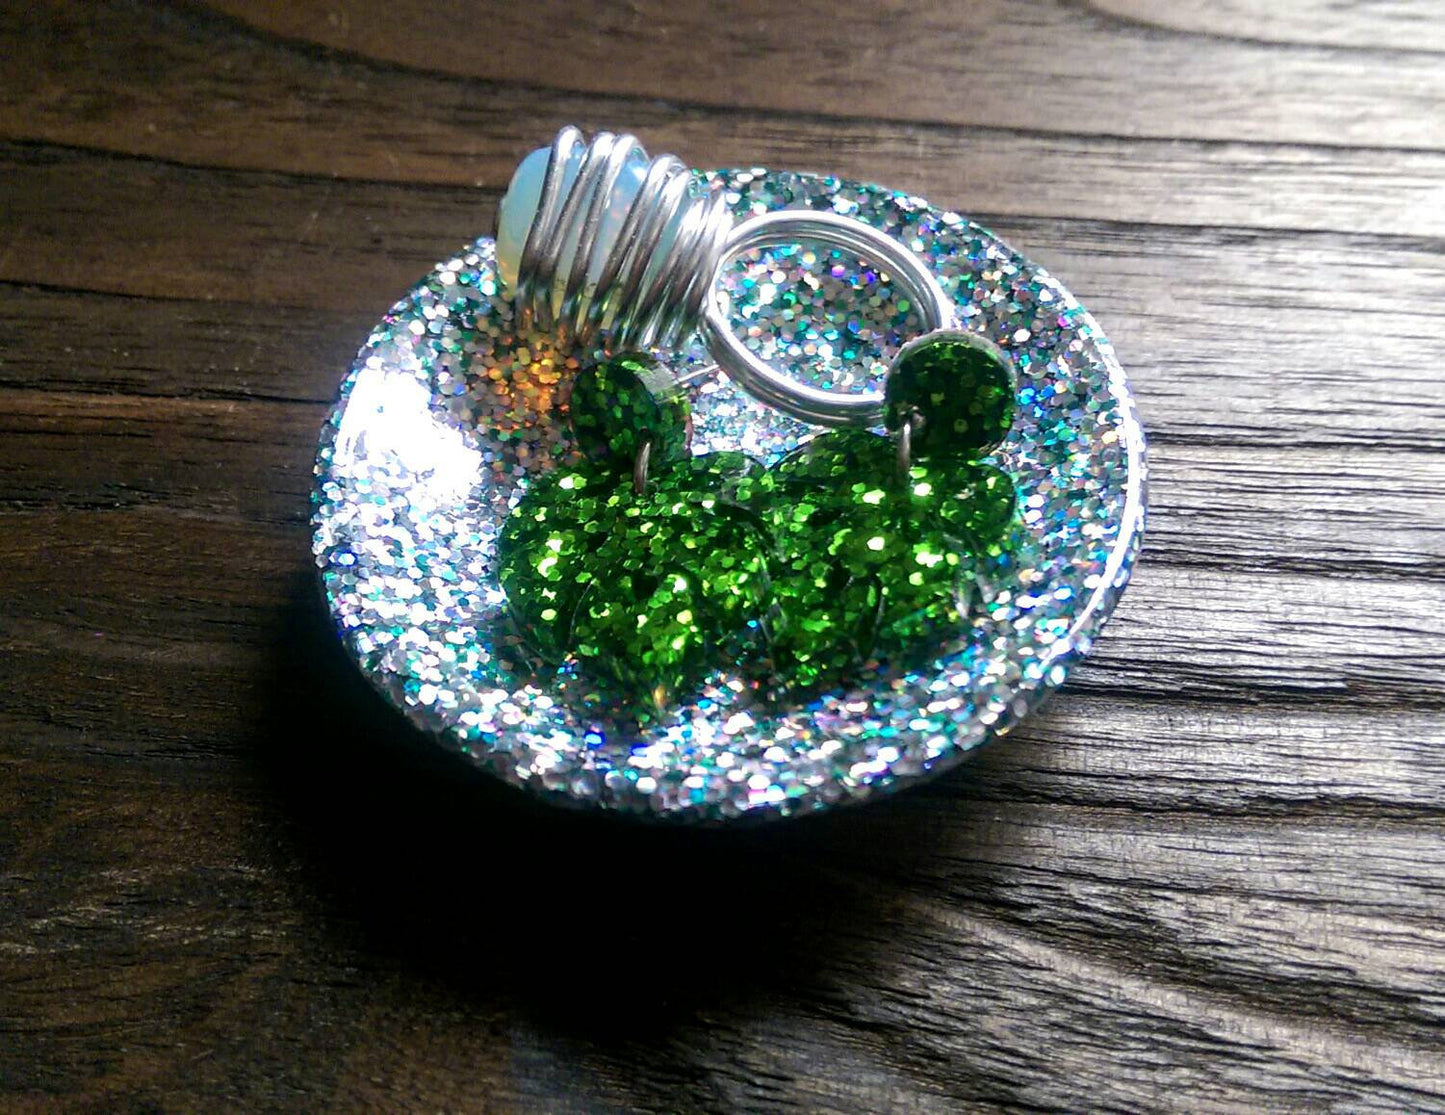 Ring Trinket Dish Silver Holographic & Green Holographic Sparkly Glitter Mix Hand Made Resin Dish